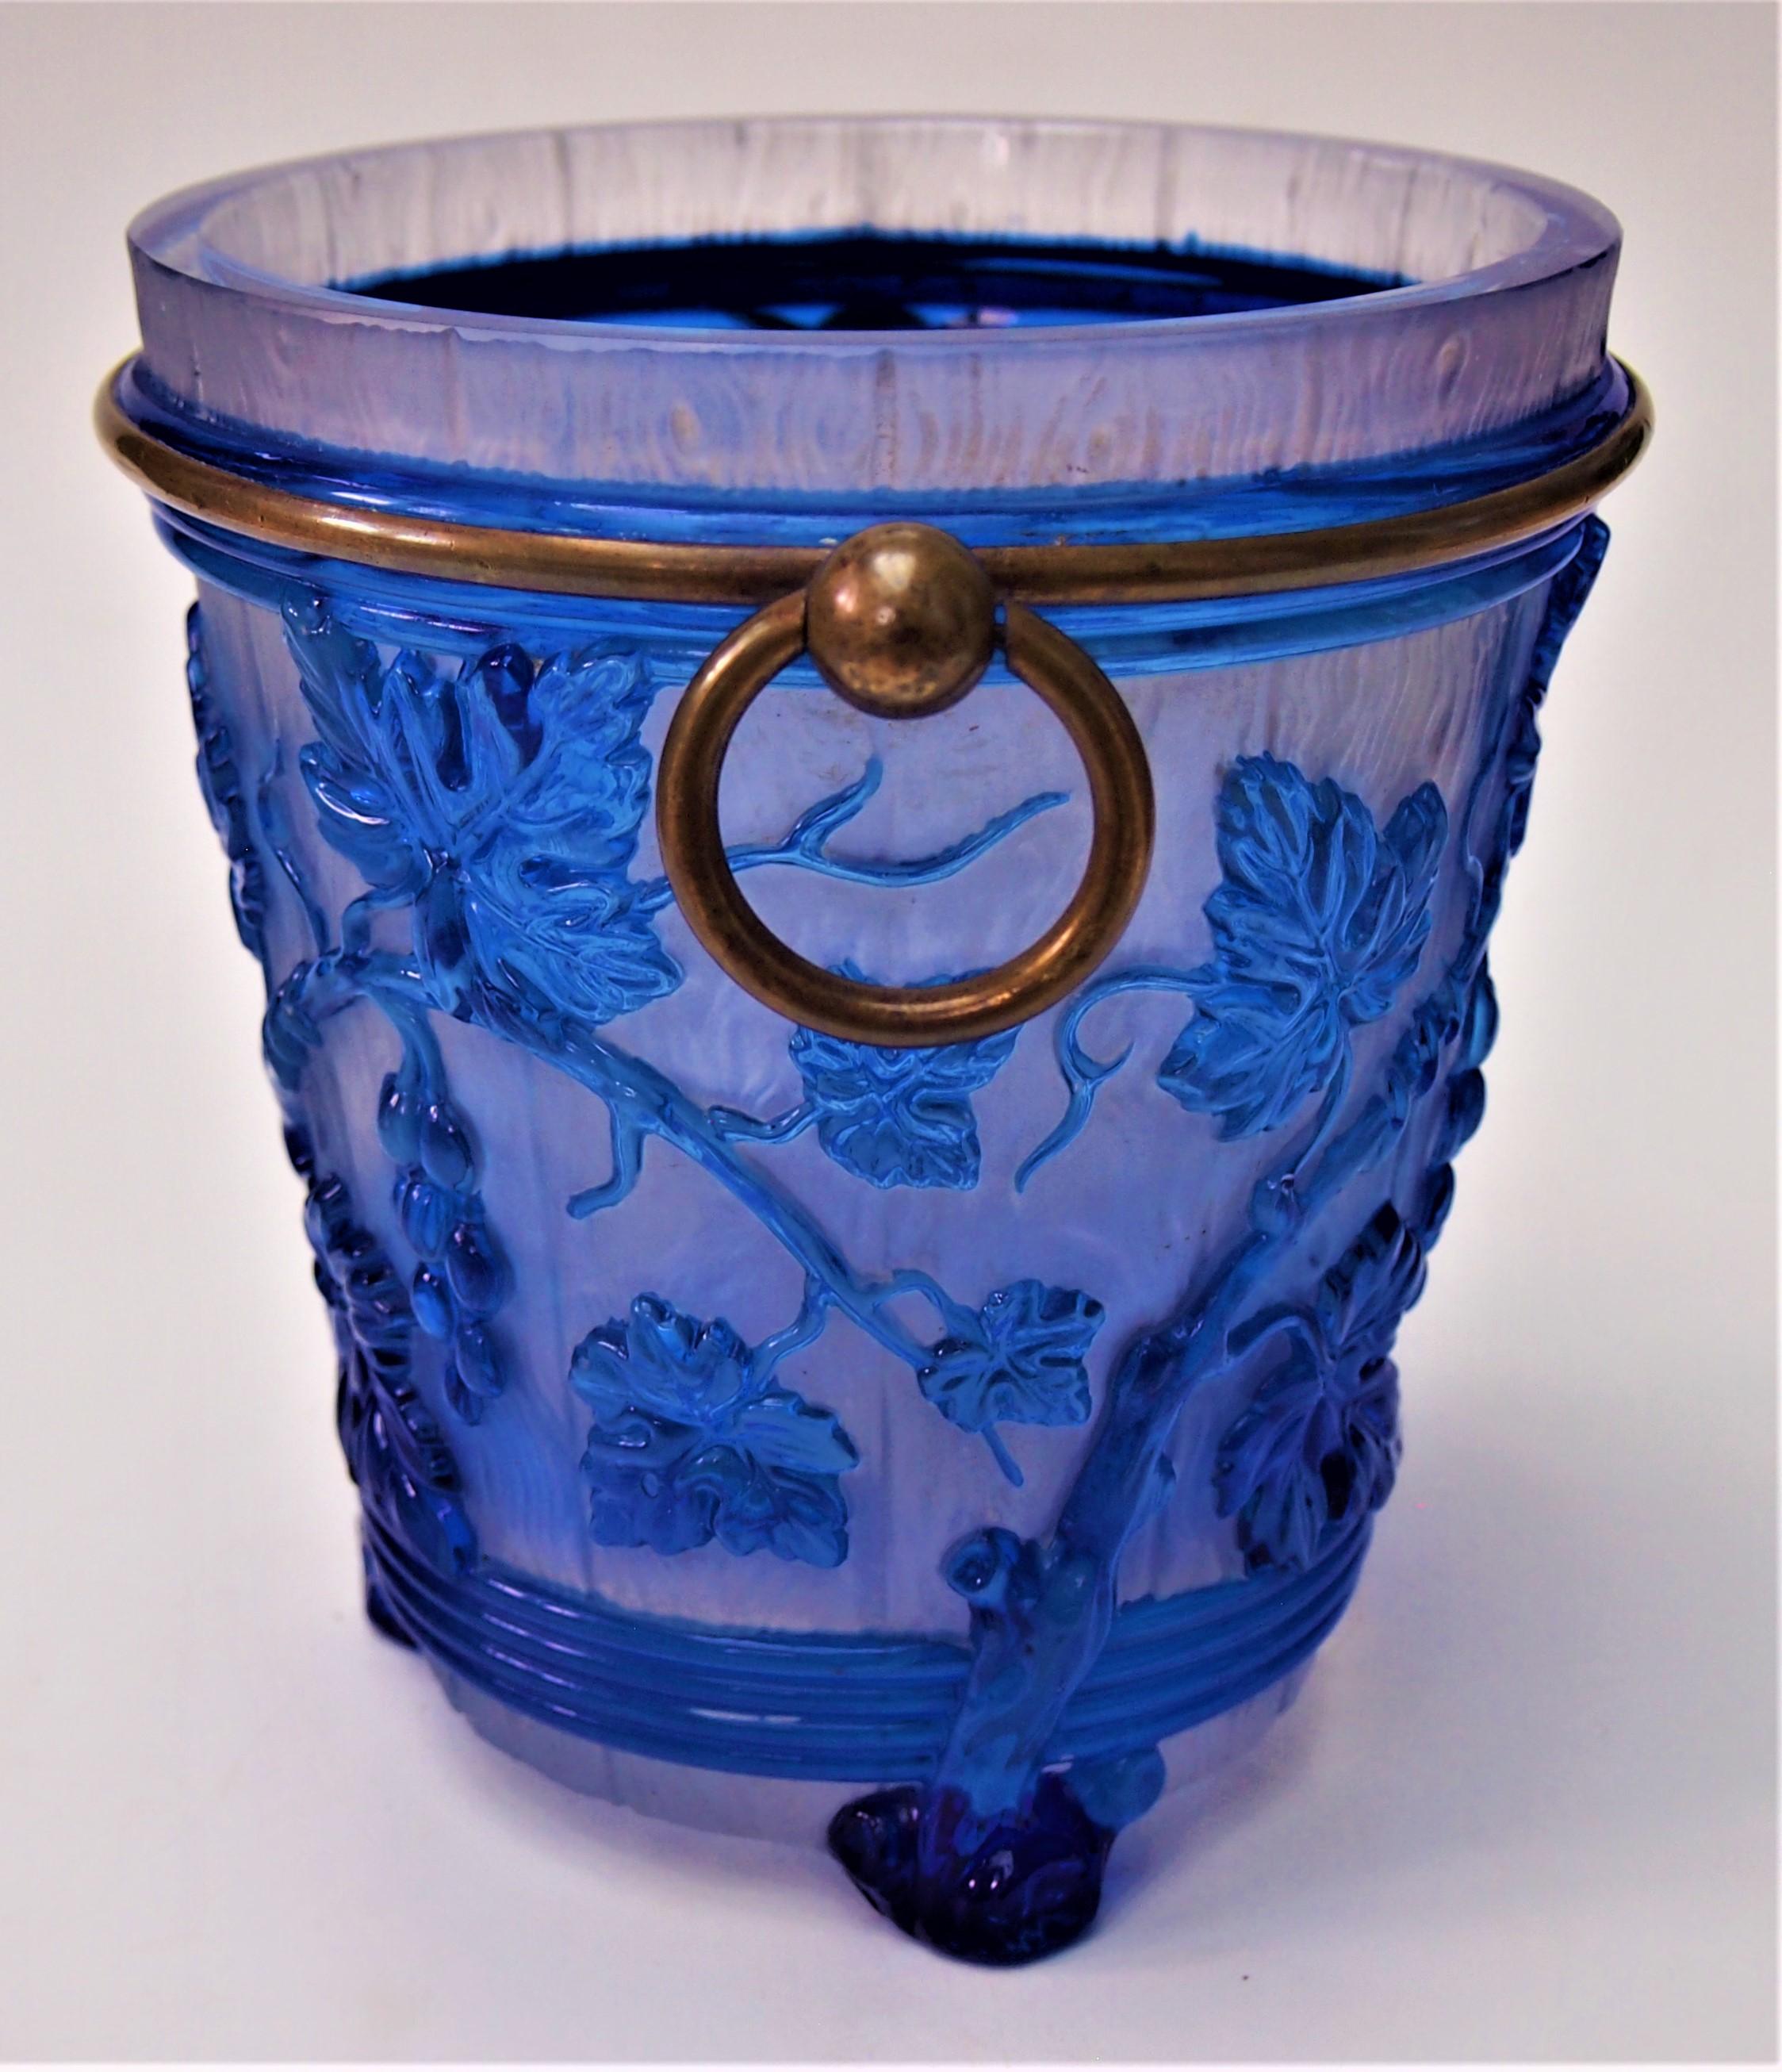 Fabulous Aesthetic Movement Baccarat Champagne Bucket  -ideal for a single bottle. Made c 1860 in pressed glass in blue crystal over (faux wood) clear crystal. Decorated with grape vines -banded with a hollow metal ring and circular handles (hollow